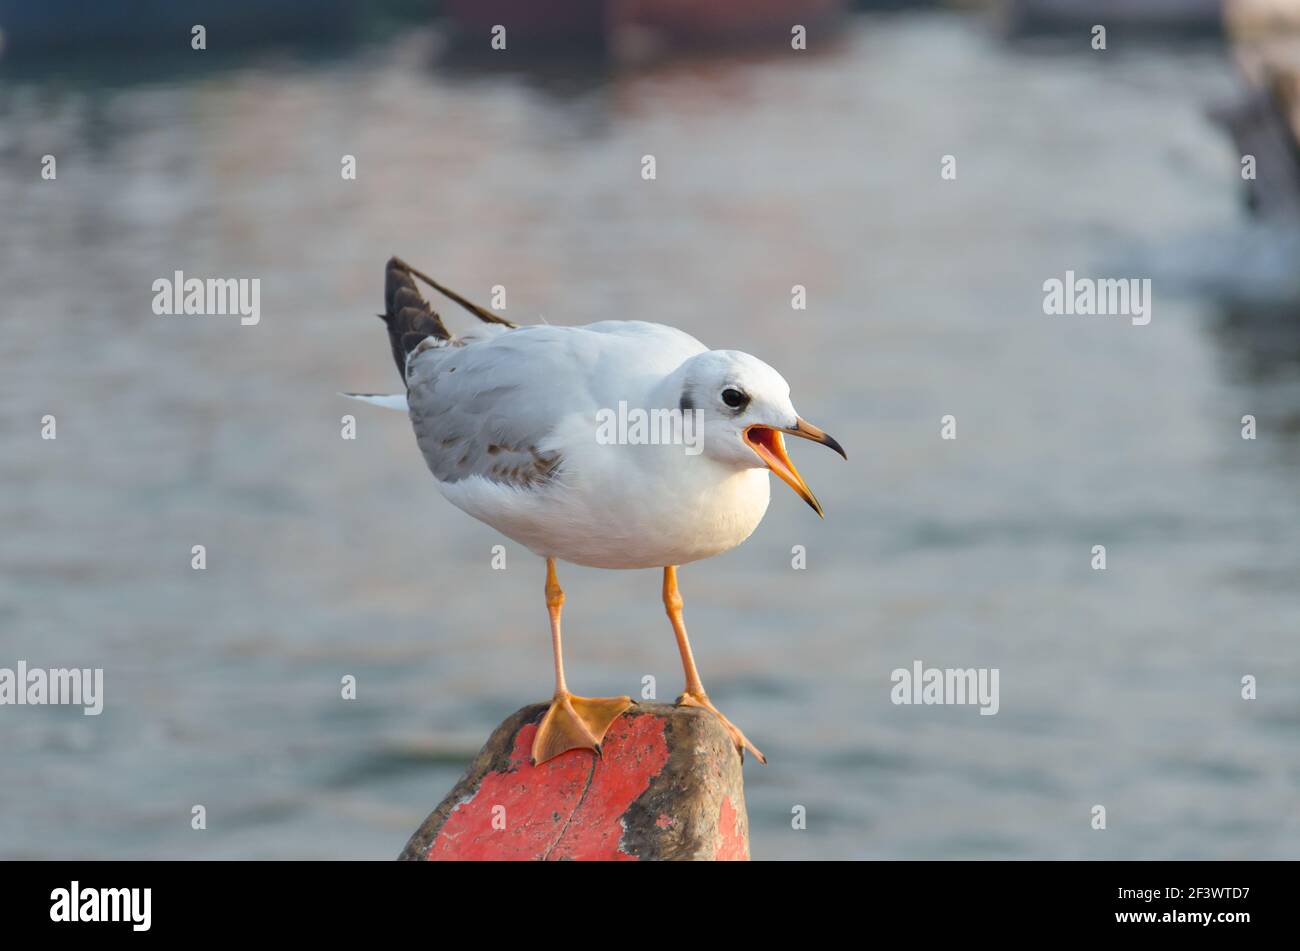 Seagull sitting on a nose of a boat Stock Photo